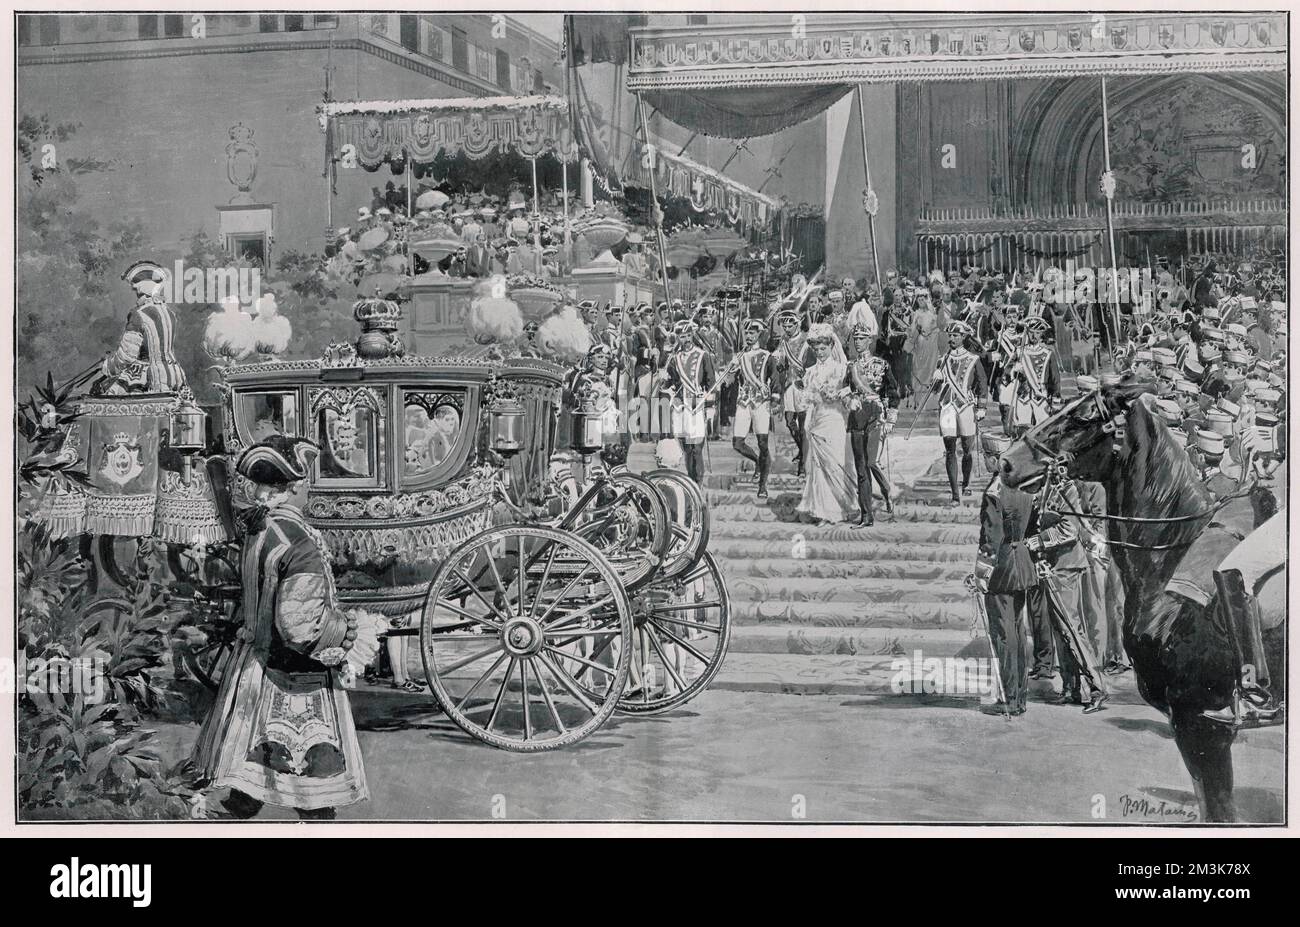 Double page illustration by Fortunino showing the royal party descending the steps of the Church of San Geronimo in Madrid following the marriage of Princess Ena of Battenberg to King Alfonso XIII of Spain on May 31st 1906. Shortly afterwards an anarchist threw a bomb at the royal couple's carriage. Ena and Alfonso escaped injury but 20 people were killed and countless others injured.     Date: 01/06/1906 Stock Photo